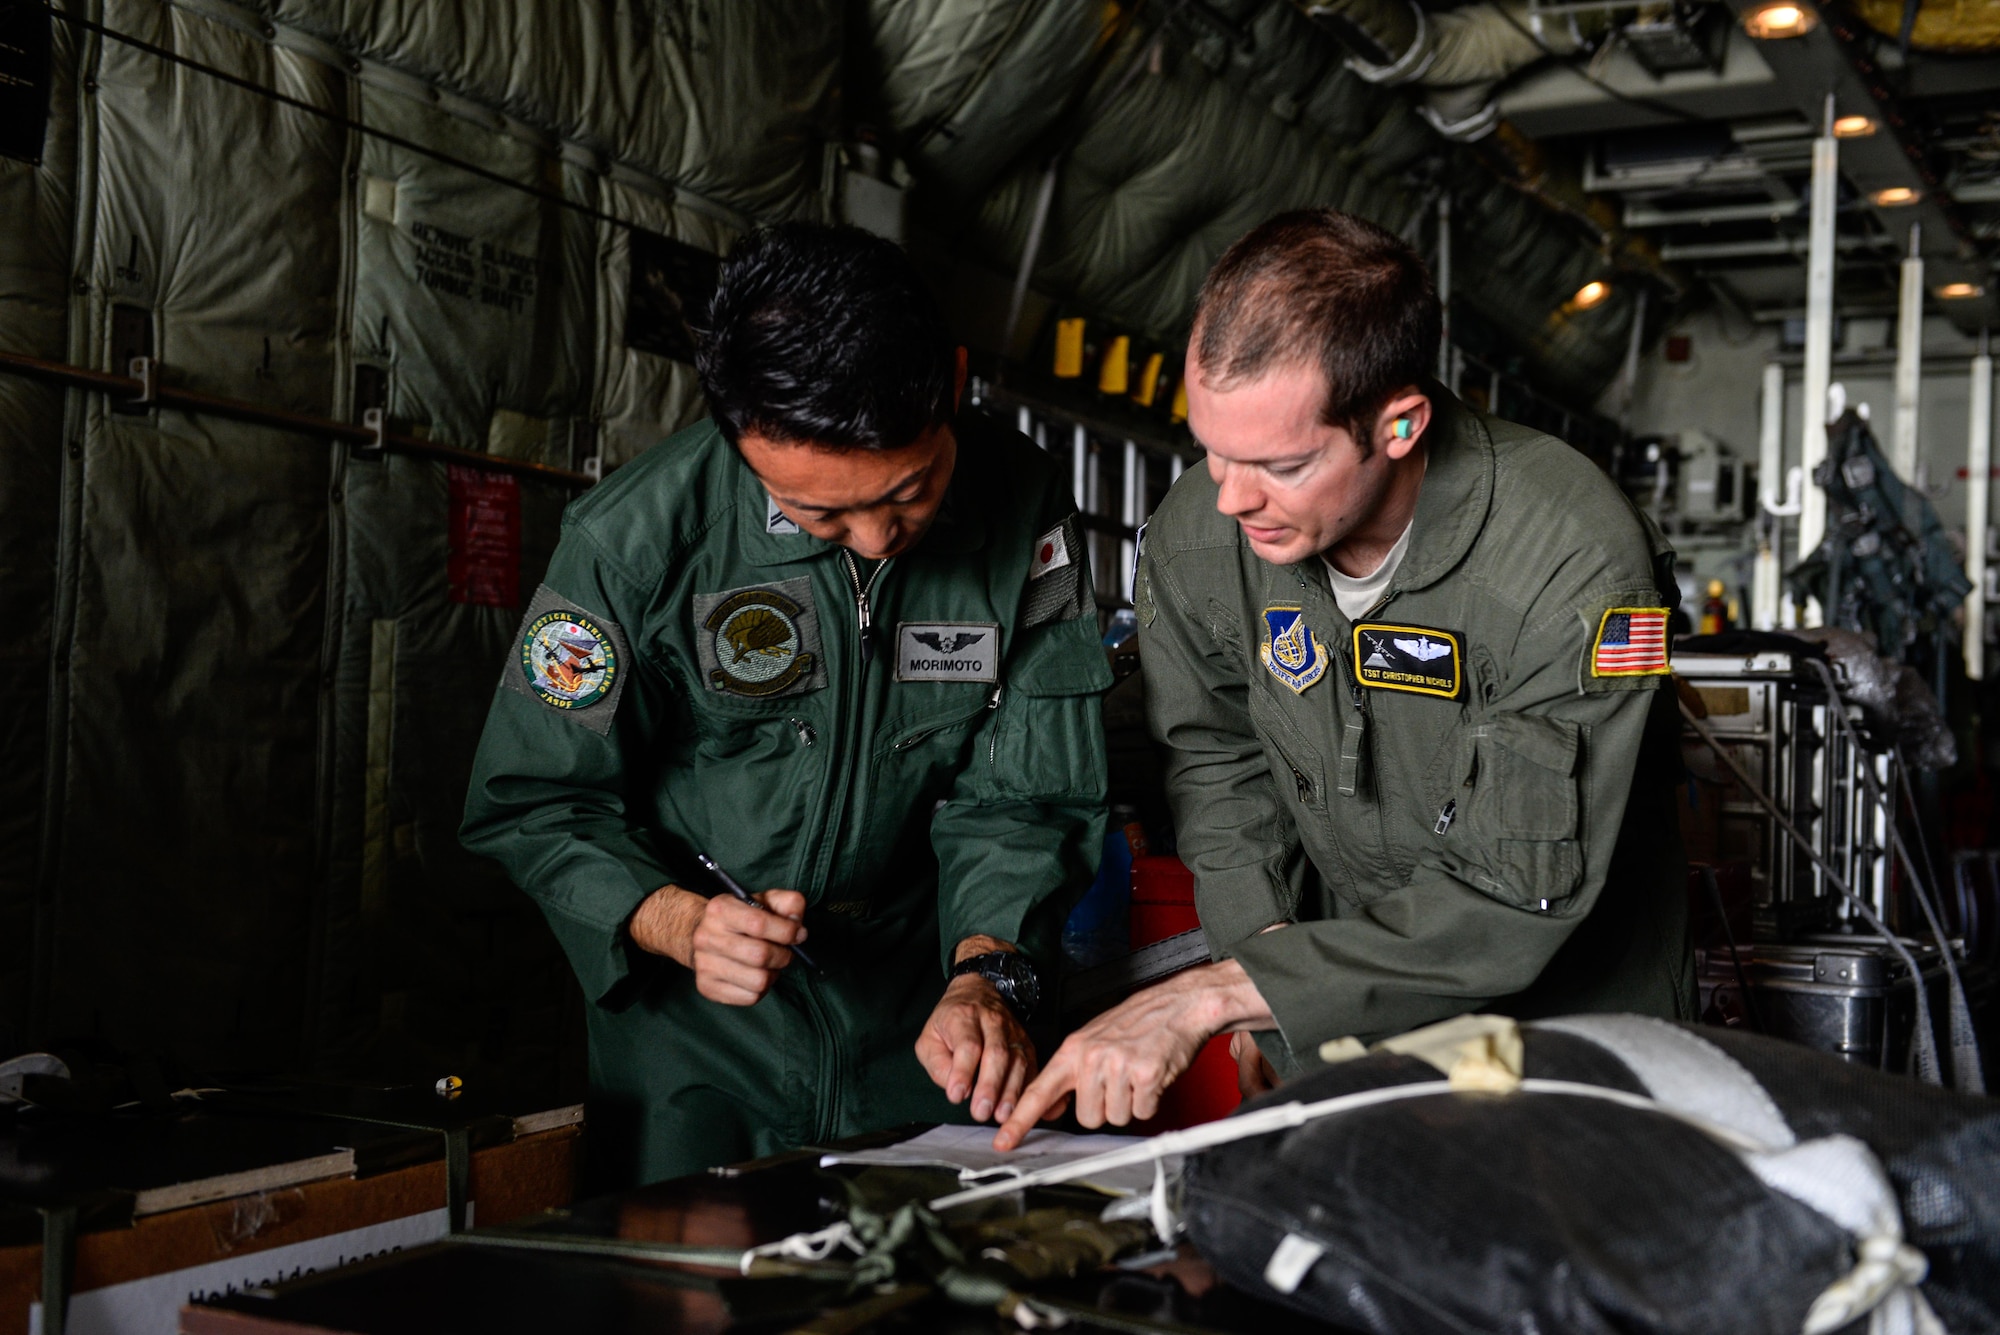 Japan Air Self-Defense Force Tech. Sgt. Satoshi Marimoto, left, and U.S. Air Force Tech. Sgt. Christopher Nichols, both C-130 loadmasters, review load documents before Operation Christmas Drop flight SANTA12 Dec. 8, 2015, at Andersen Air Force Base, Guam. The 2015 Christmas Drop missions marked the first time the event included trilateral air support from the JASDF and Royal Australian Air Force. (U.S. Air Force photo/Staff Sgt. Alexander W. Riedel)